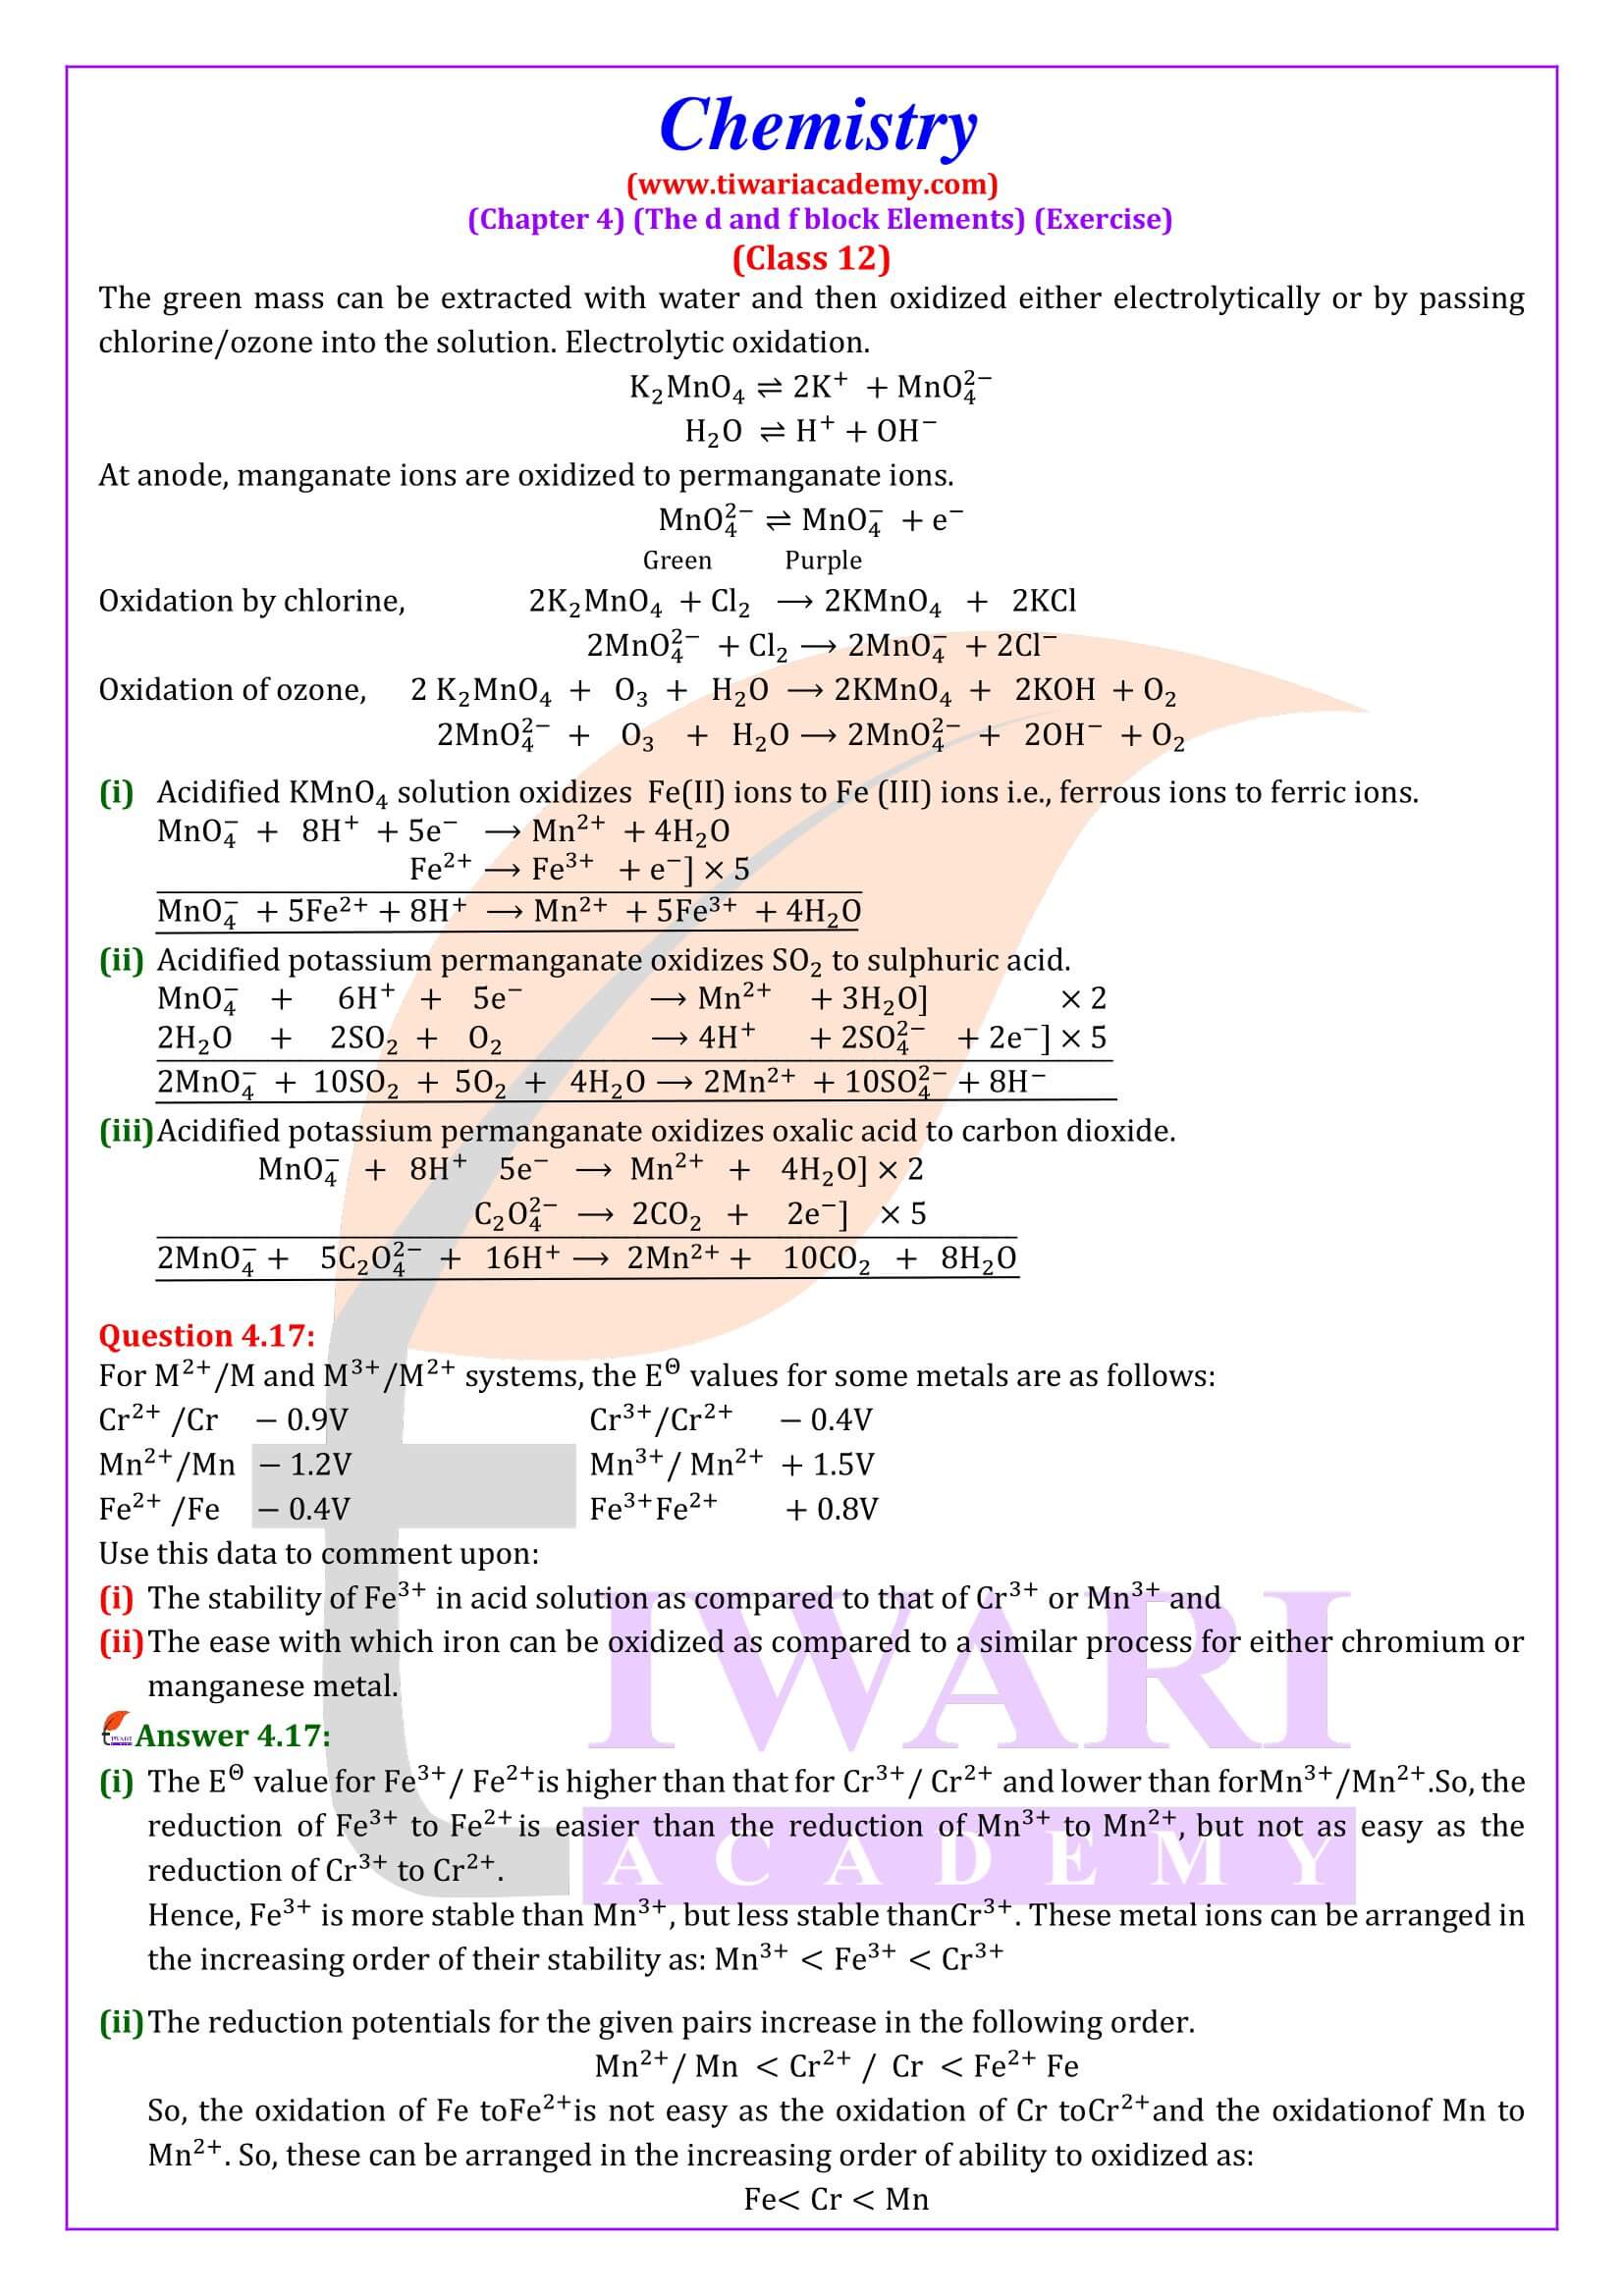 NCERT Solutions for Class 12 Chemistry Chapter 4 Exercises Answers